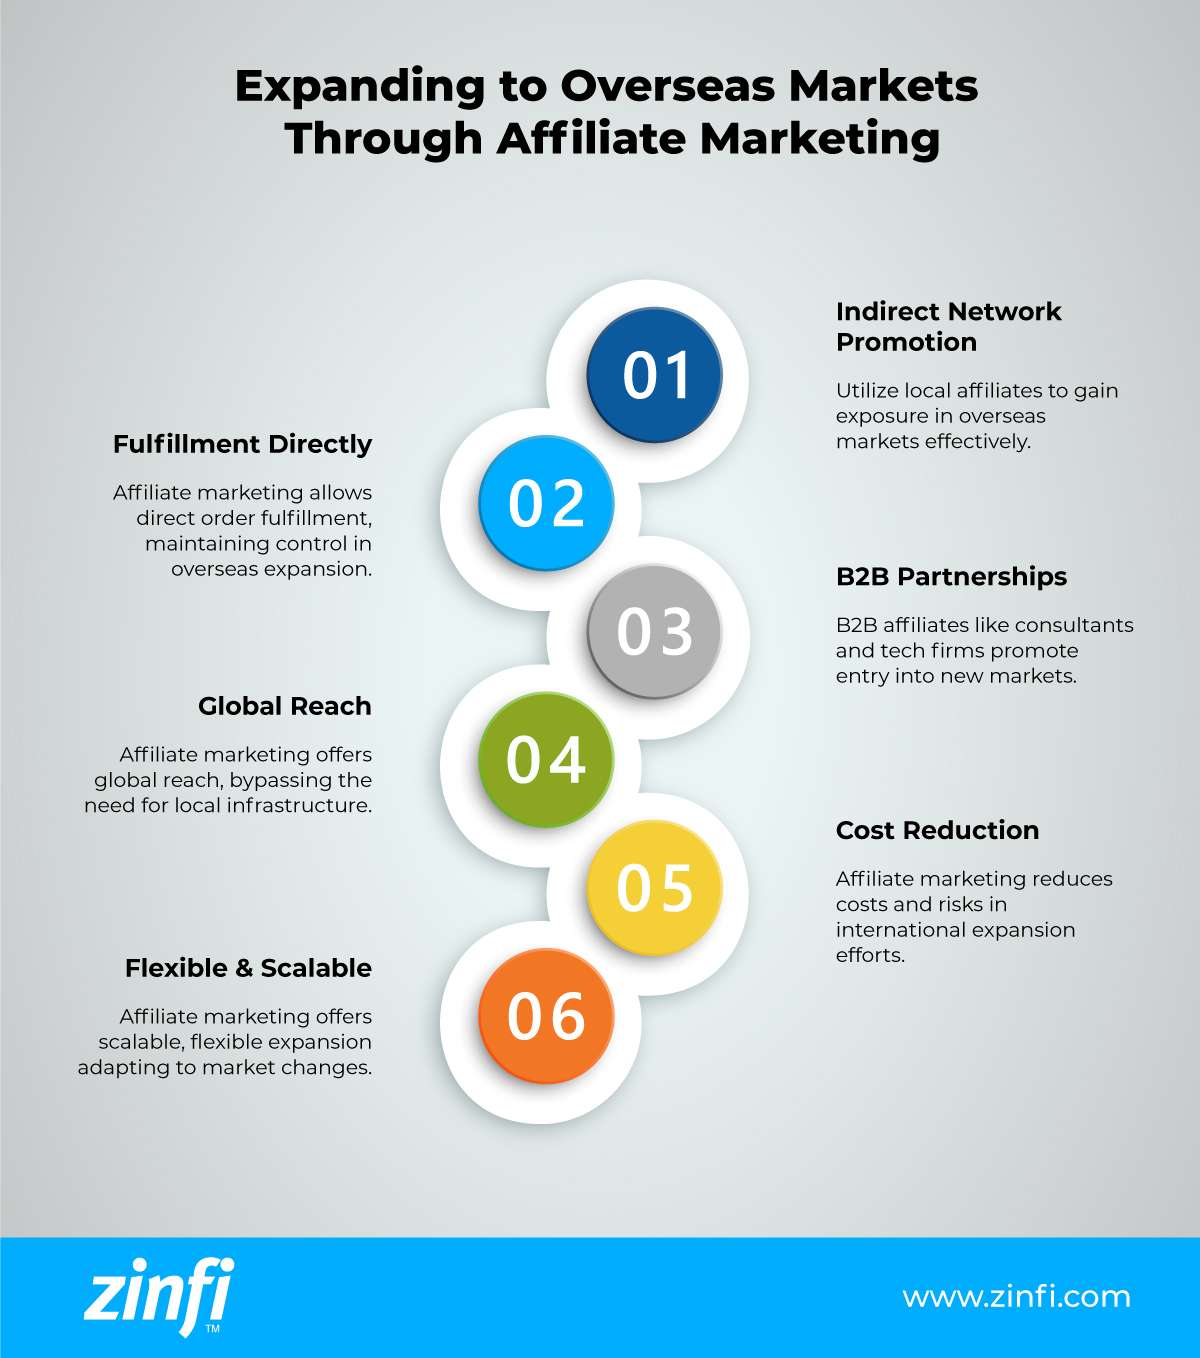 Infographic on How to Expand to Overseas Markets Through Affiliate Marketing